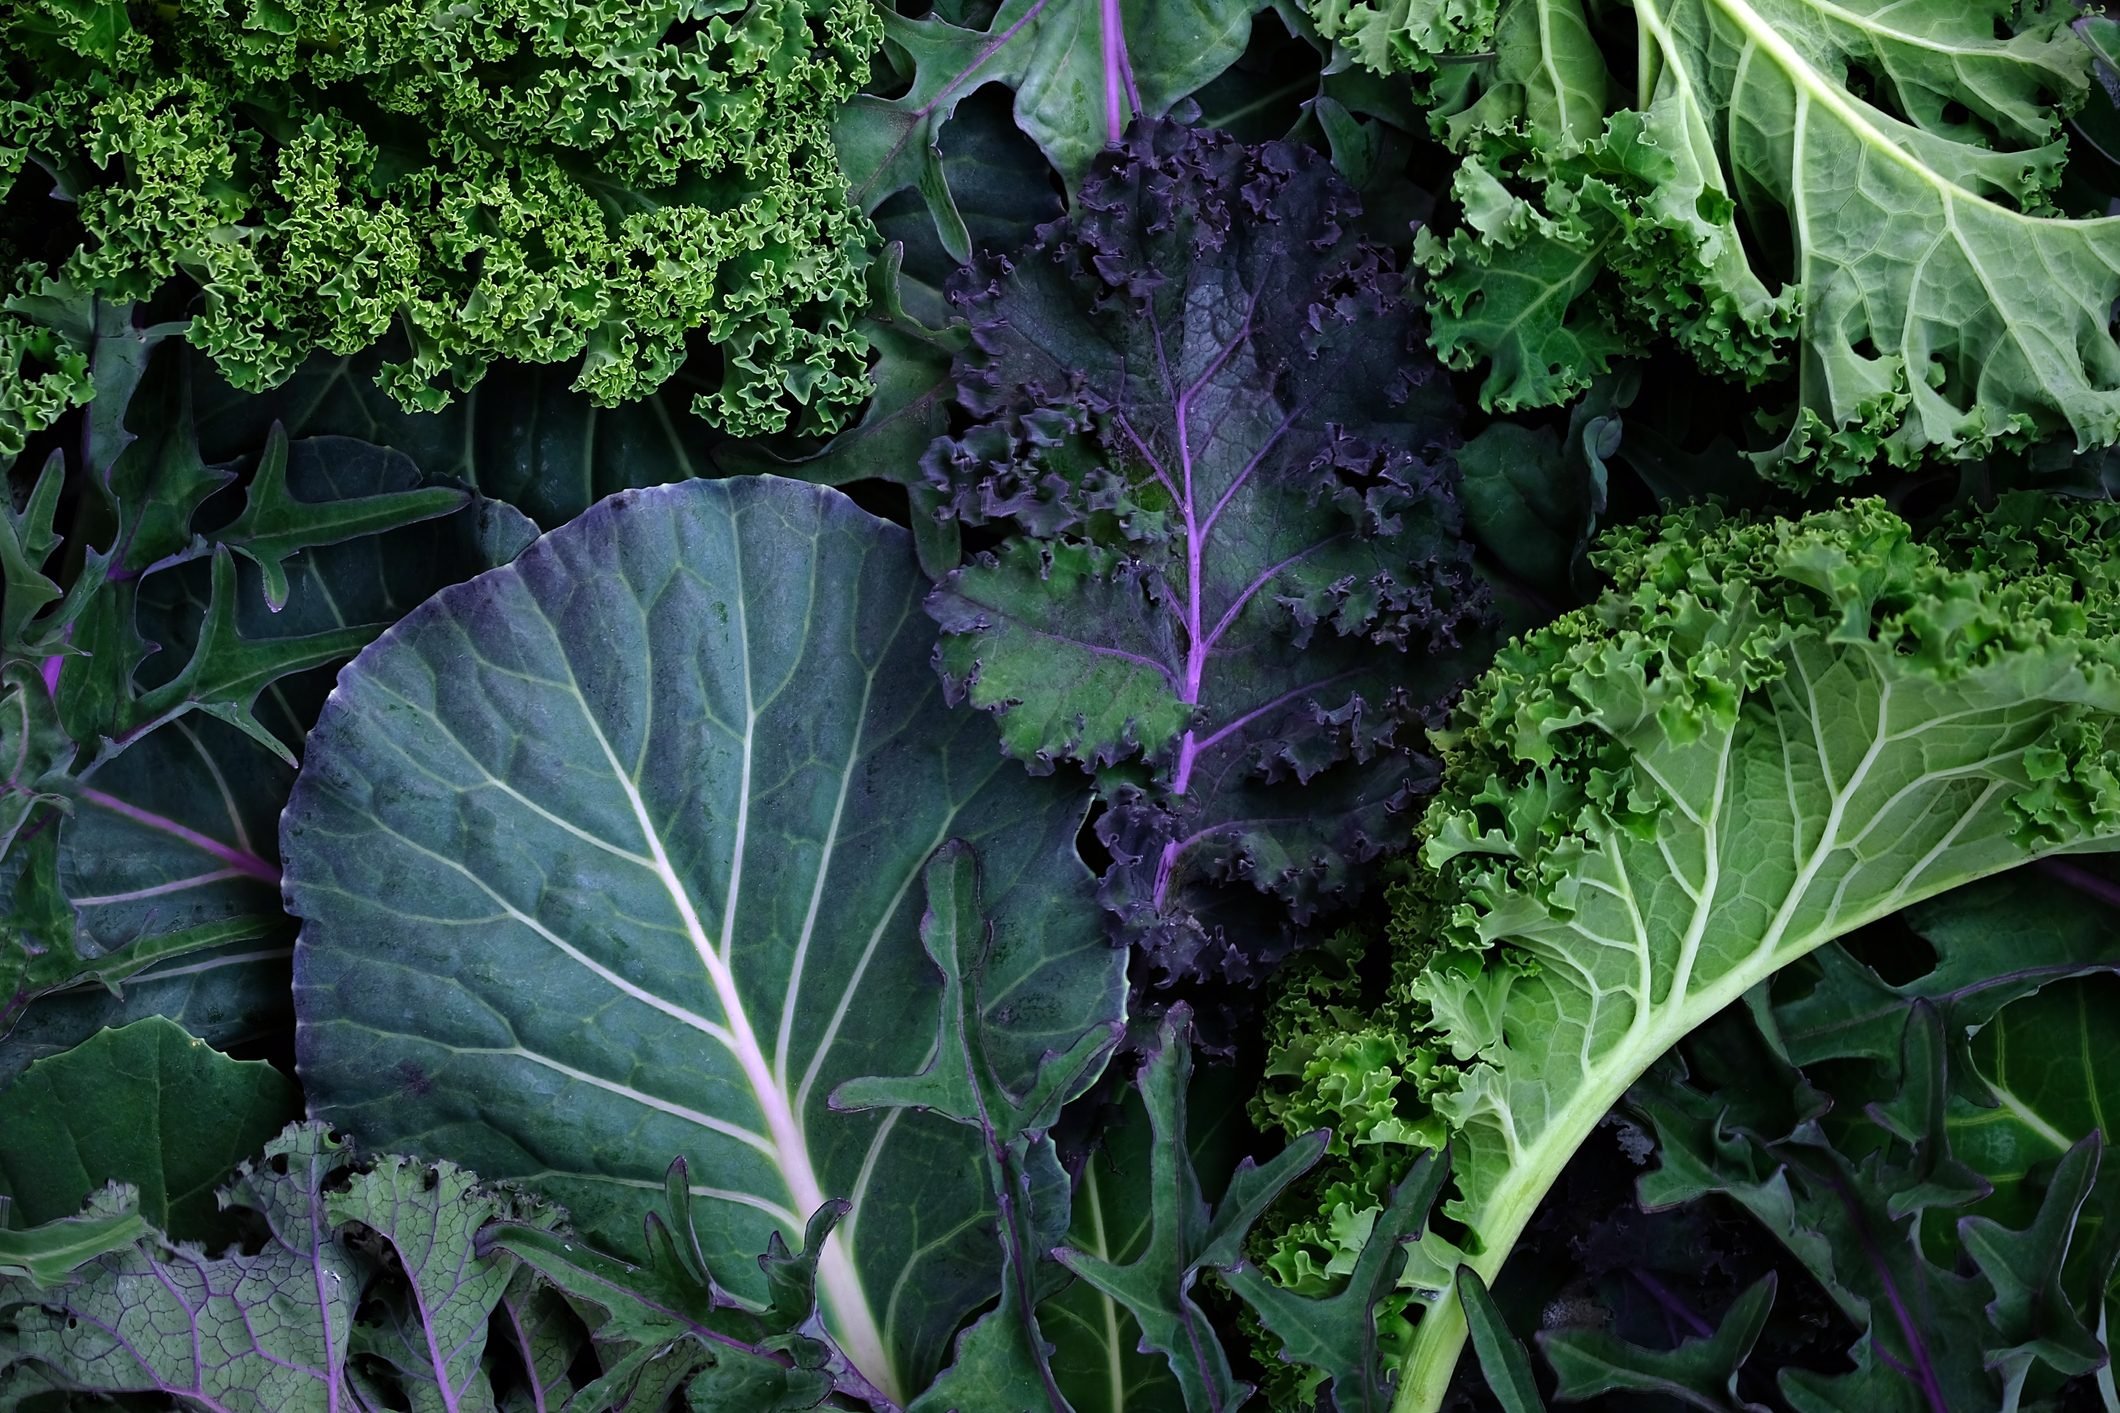 New Study: Some Bacteria Grow Worst on These Leafy Greens